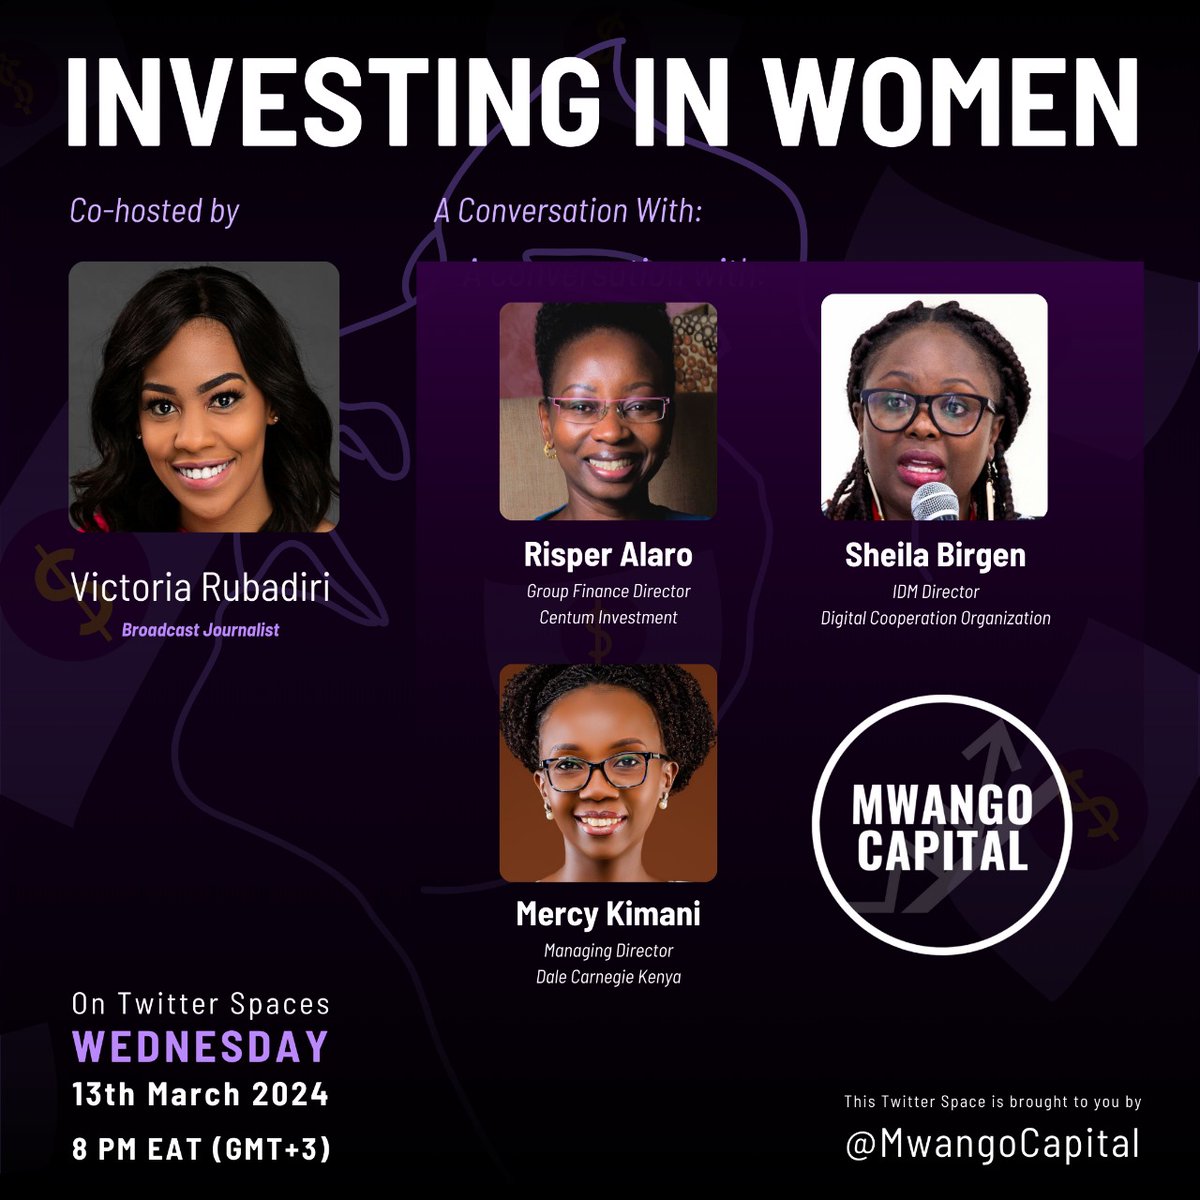 Tonight on #MwangoSpaces we have a candid conversation on investing in women. Our Host: — @VickyRubadiri, Broadcast Journalist. Our Guests: —@RisperMukoto from @CentumPLC —@SheilahBirgen from DCO —Mercy Kimani from @dalecarnegieKE Welcome!